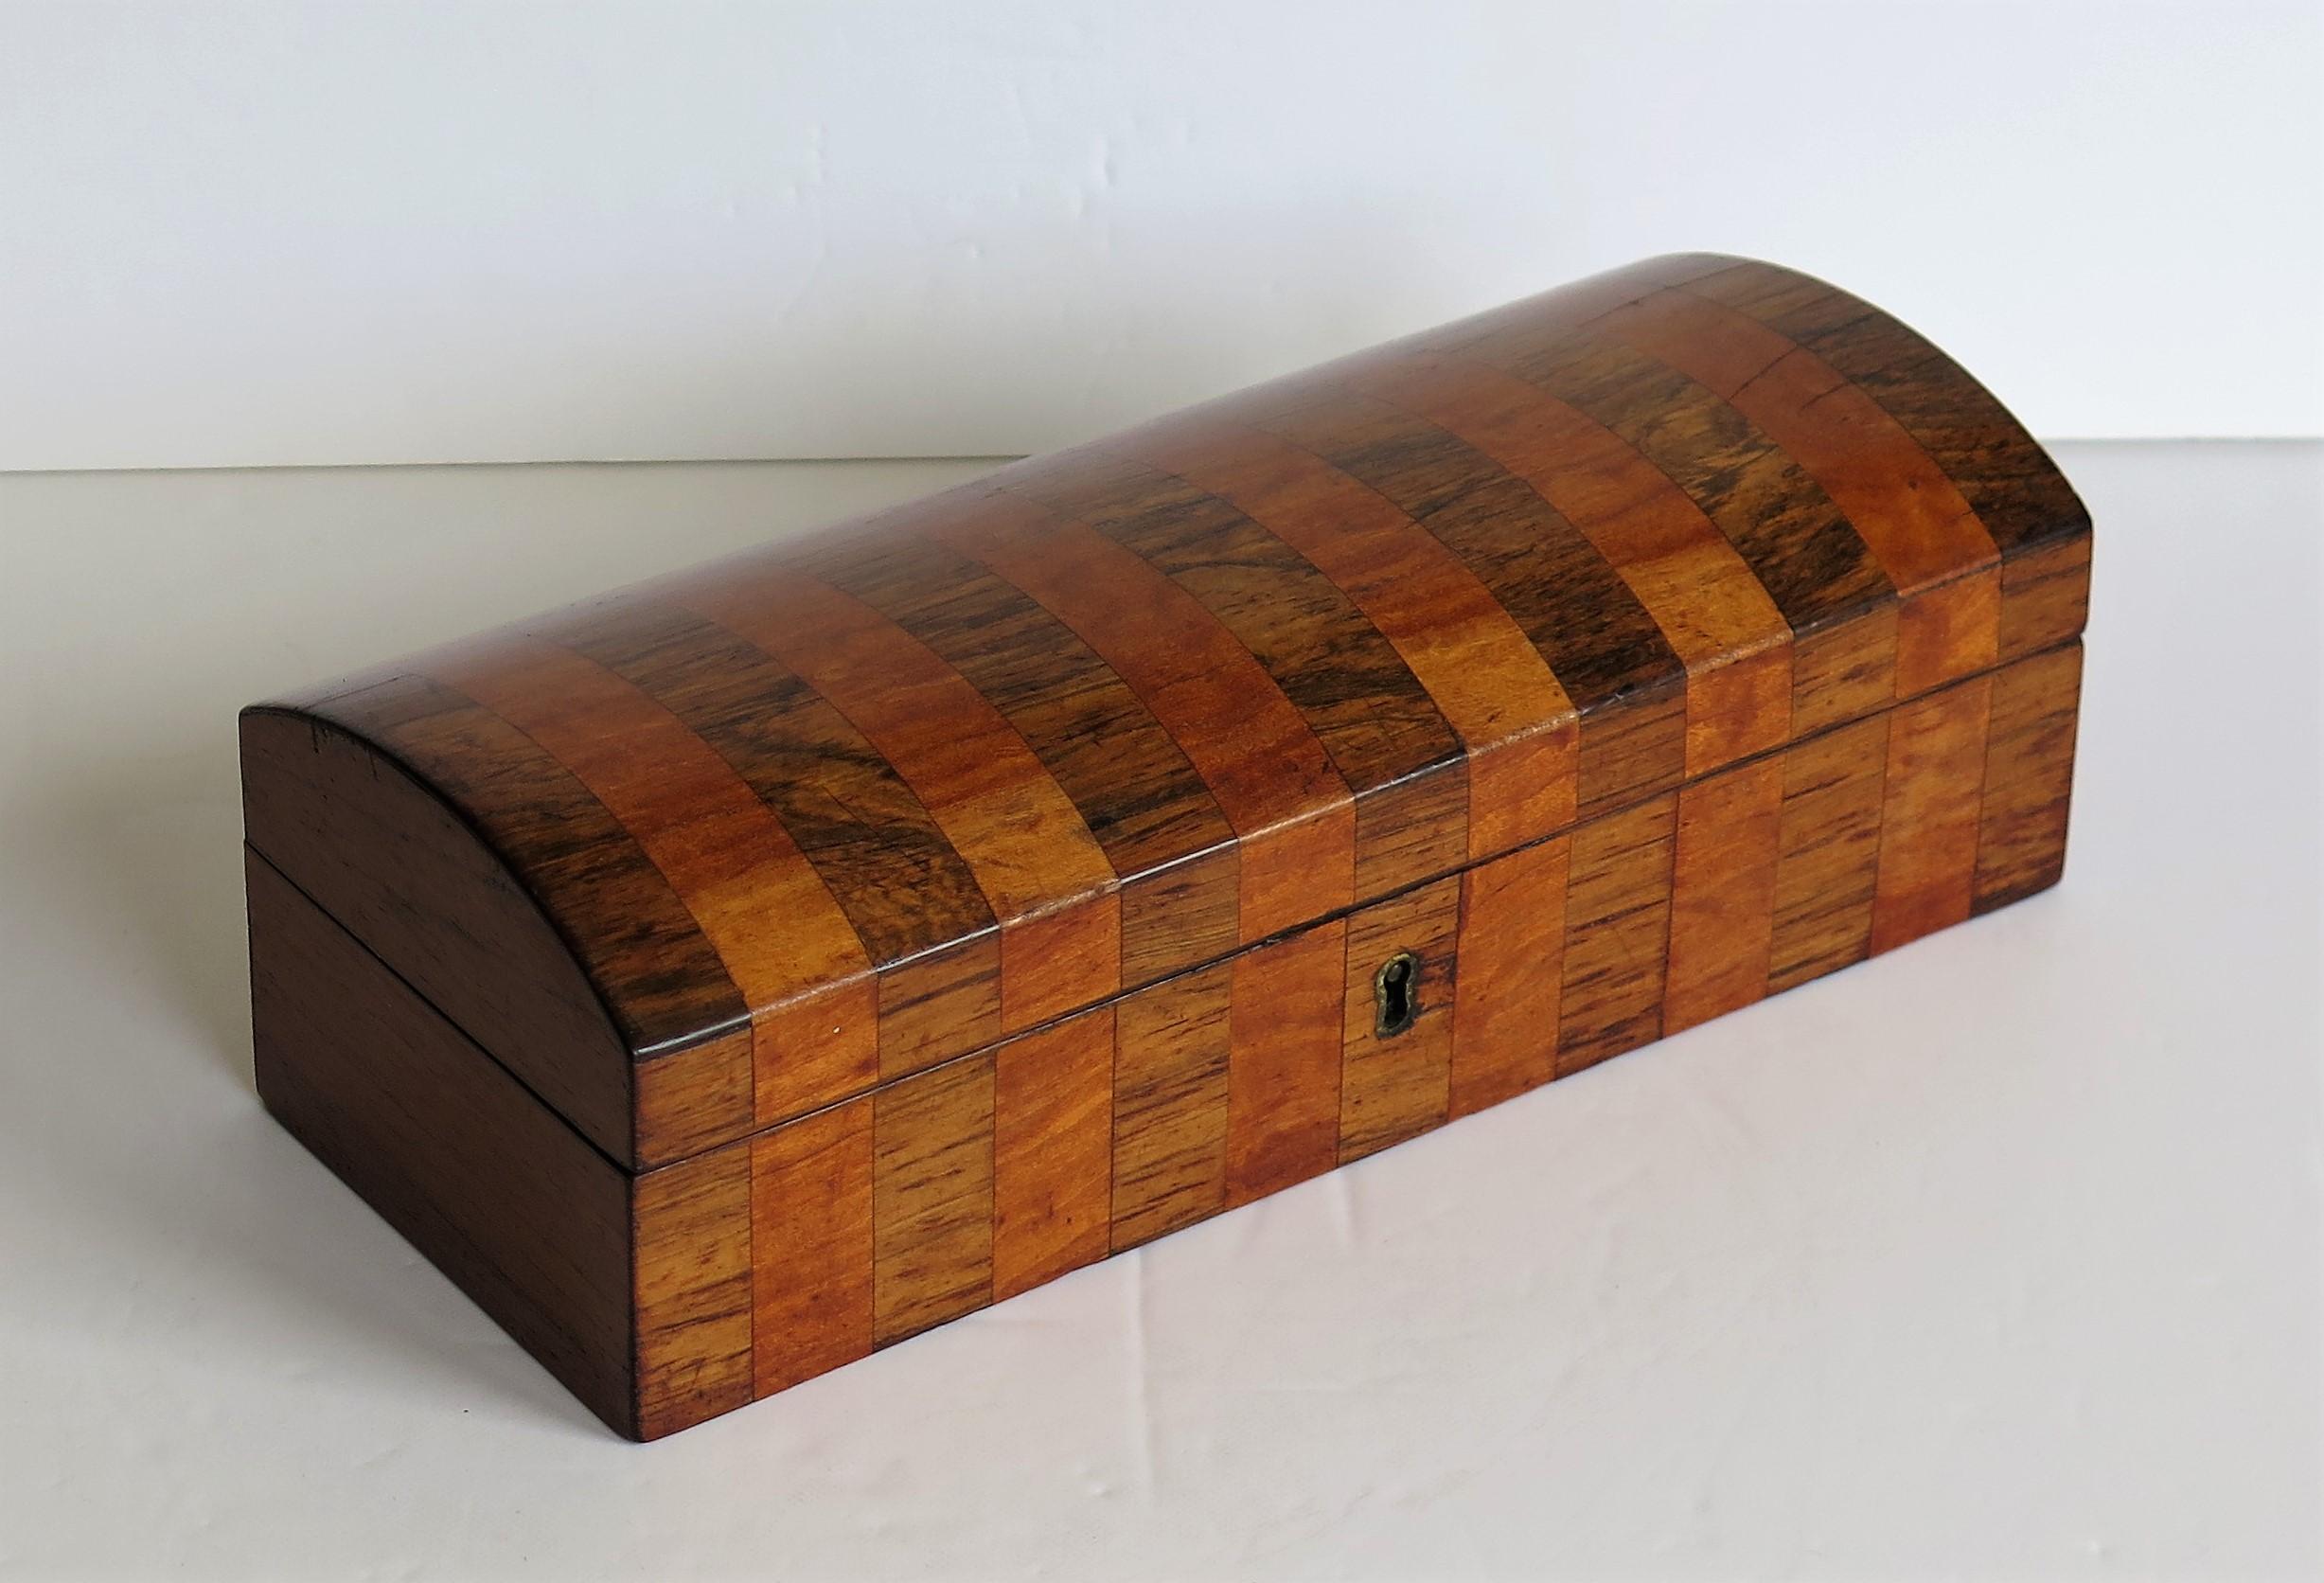 Hand-Crafted Georgian Box with Domed Lid Cross Banded hardwood, circa 1810